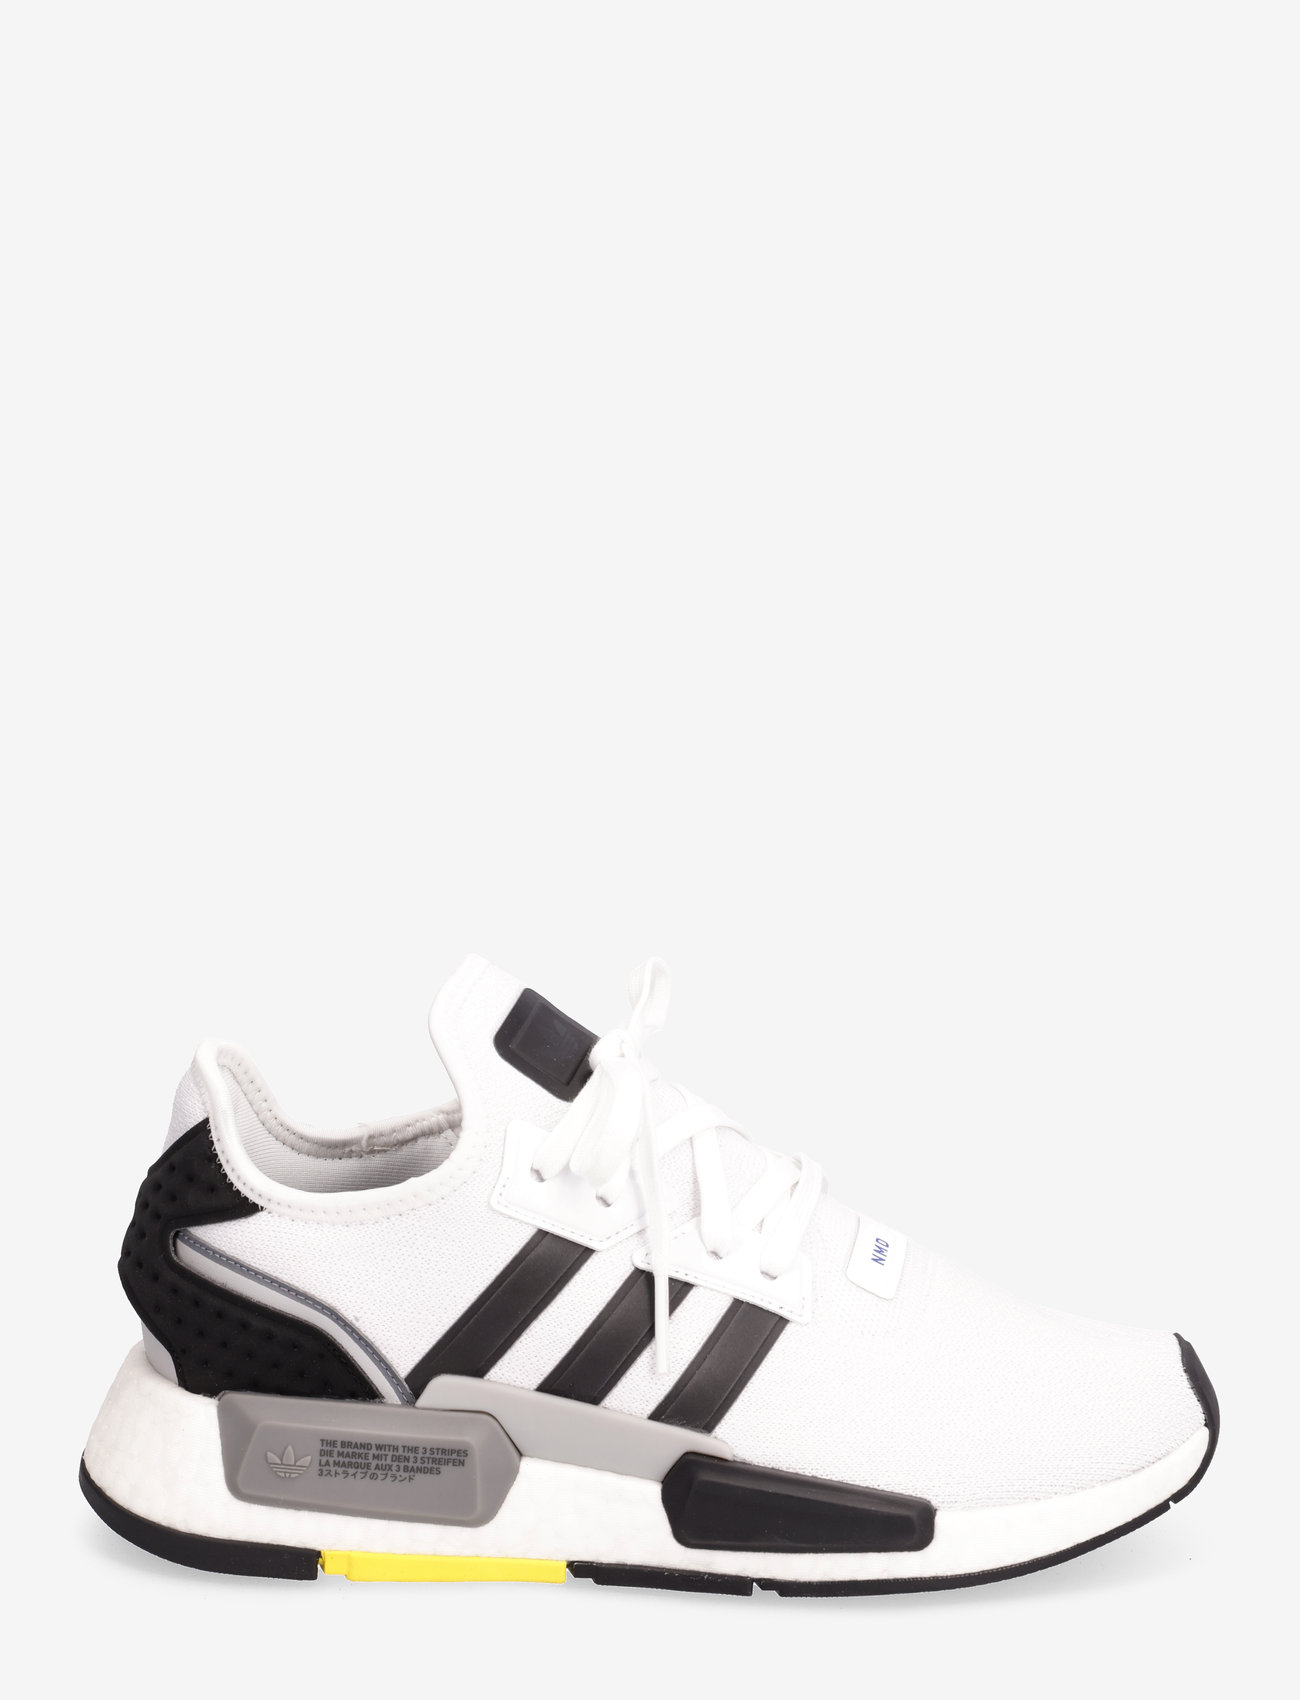 adidas Originals - NMD_G1 Shoes - low top sneakers - ftwwht/cblack/gresix - 1